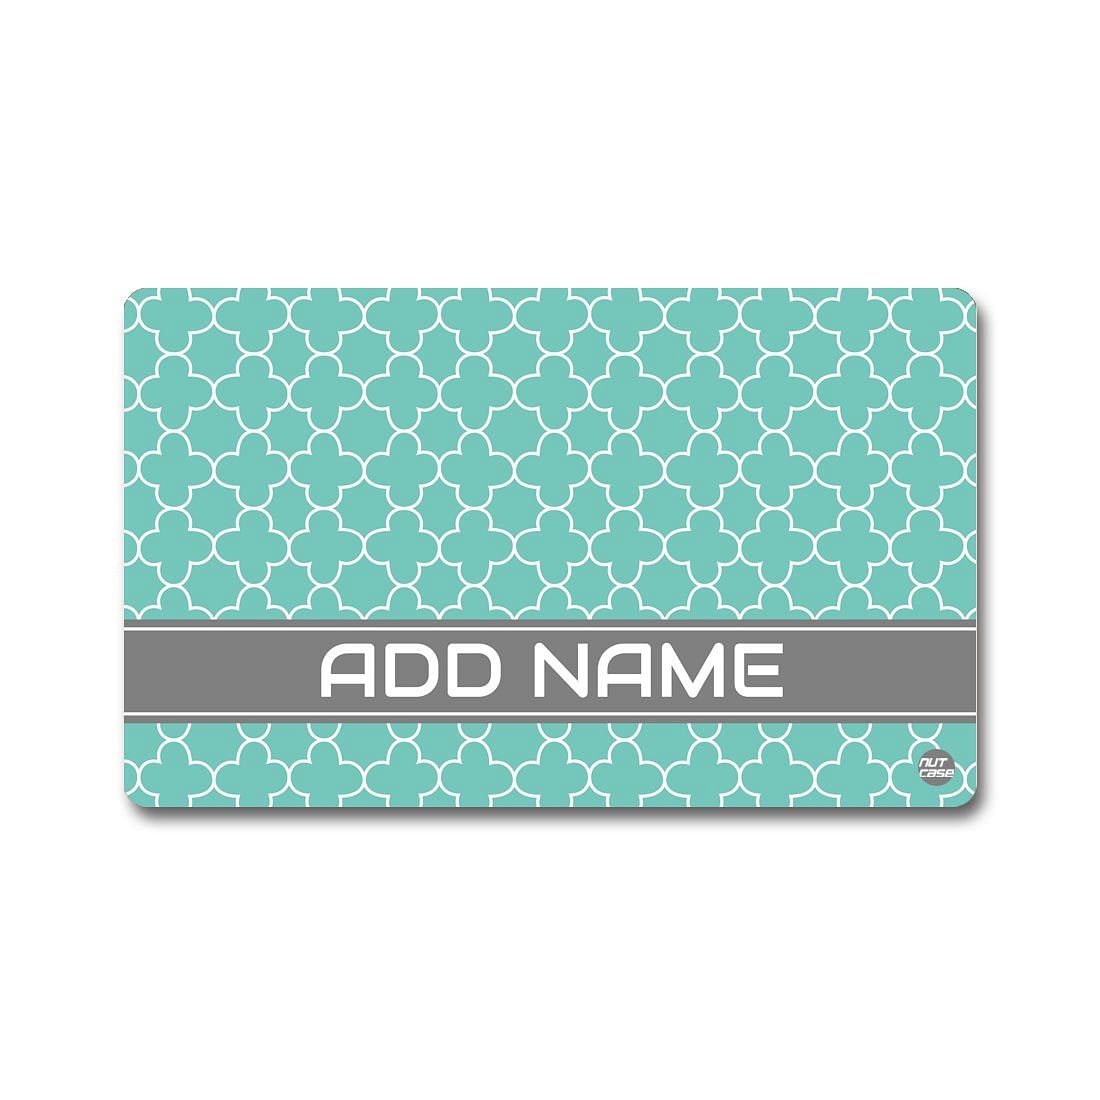 Customized Digital Business NFC Cards - Mint Blue Patter Nutcase